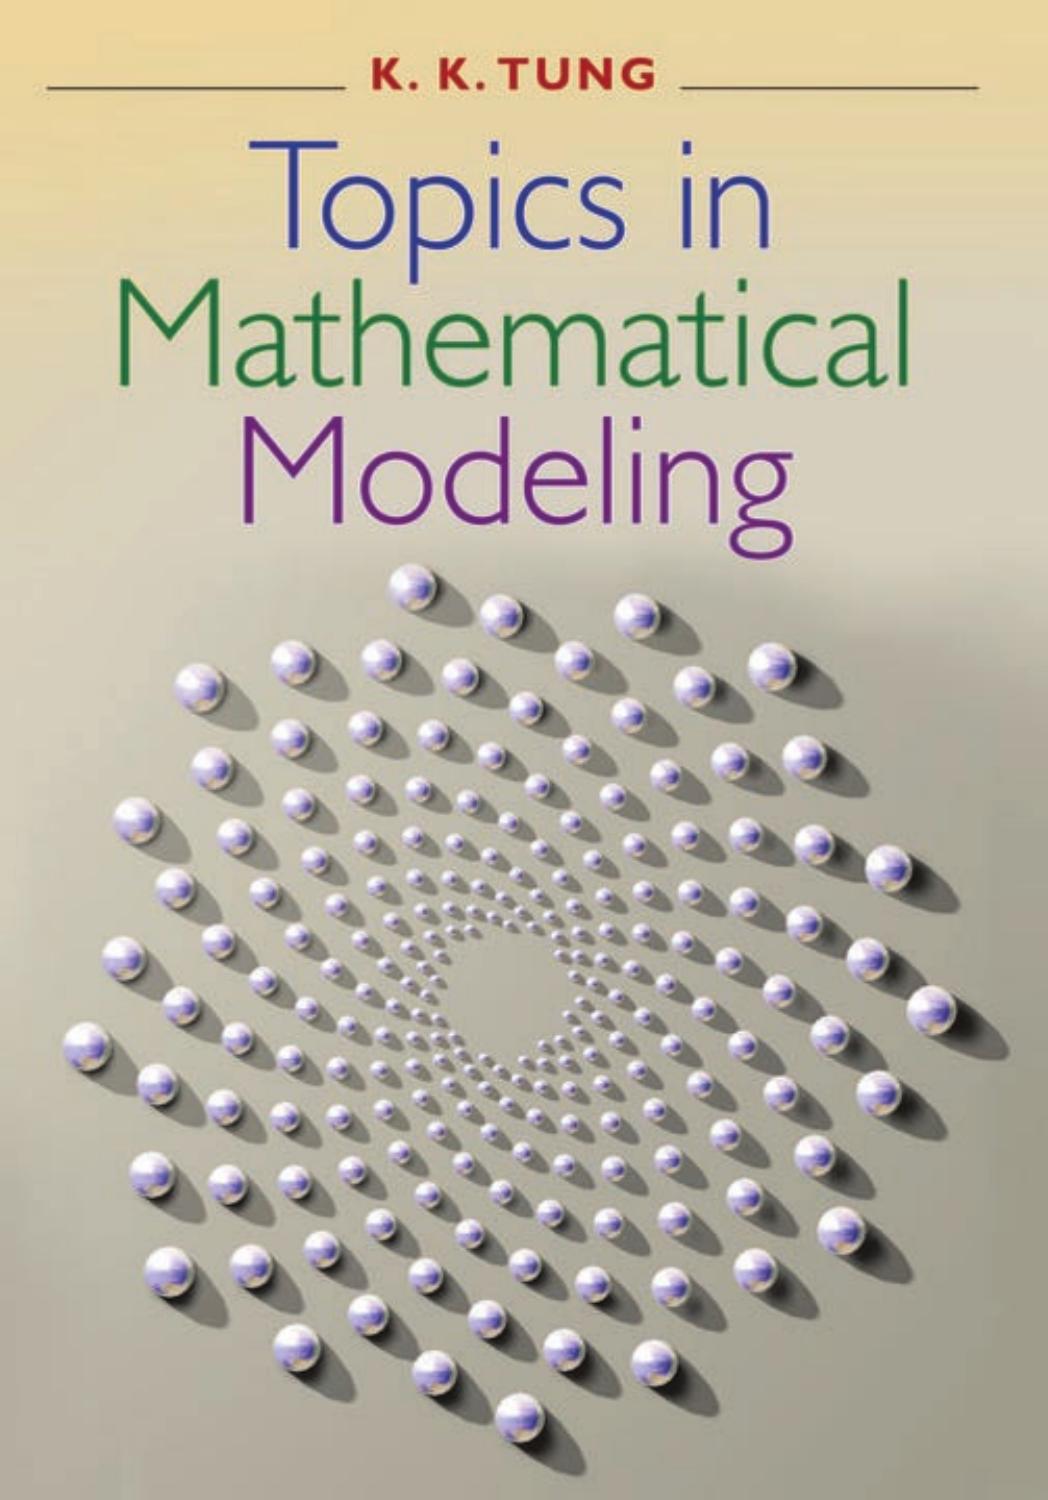 Topics in Mathematical Modeling by Tung K. K.;